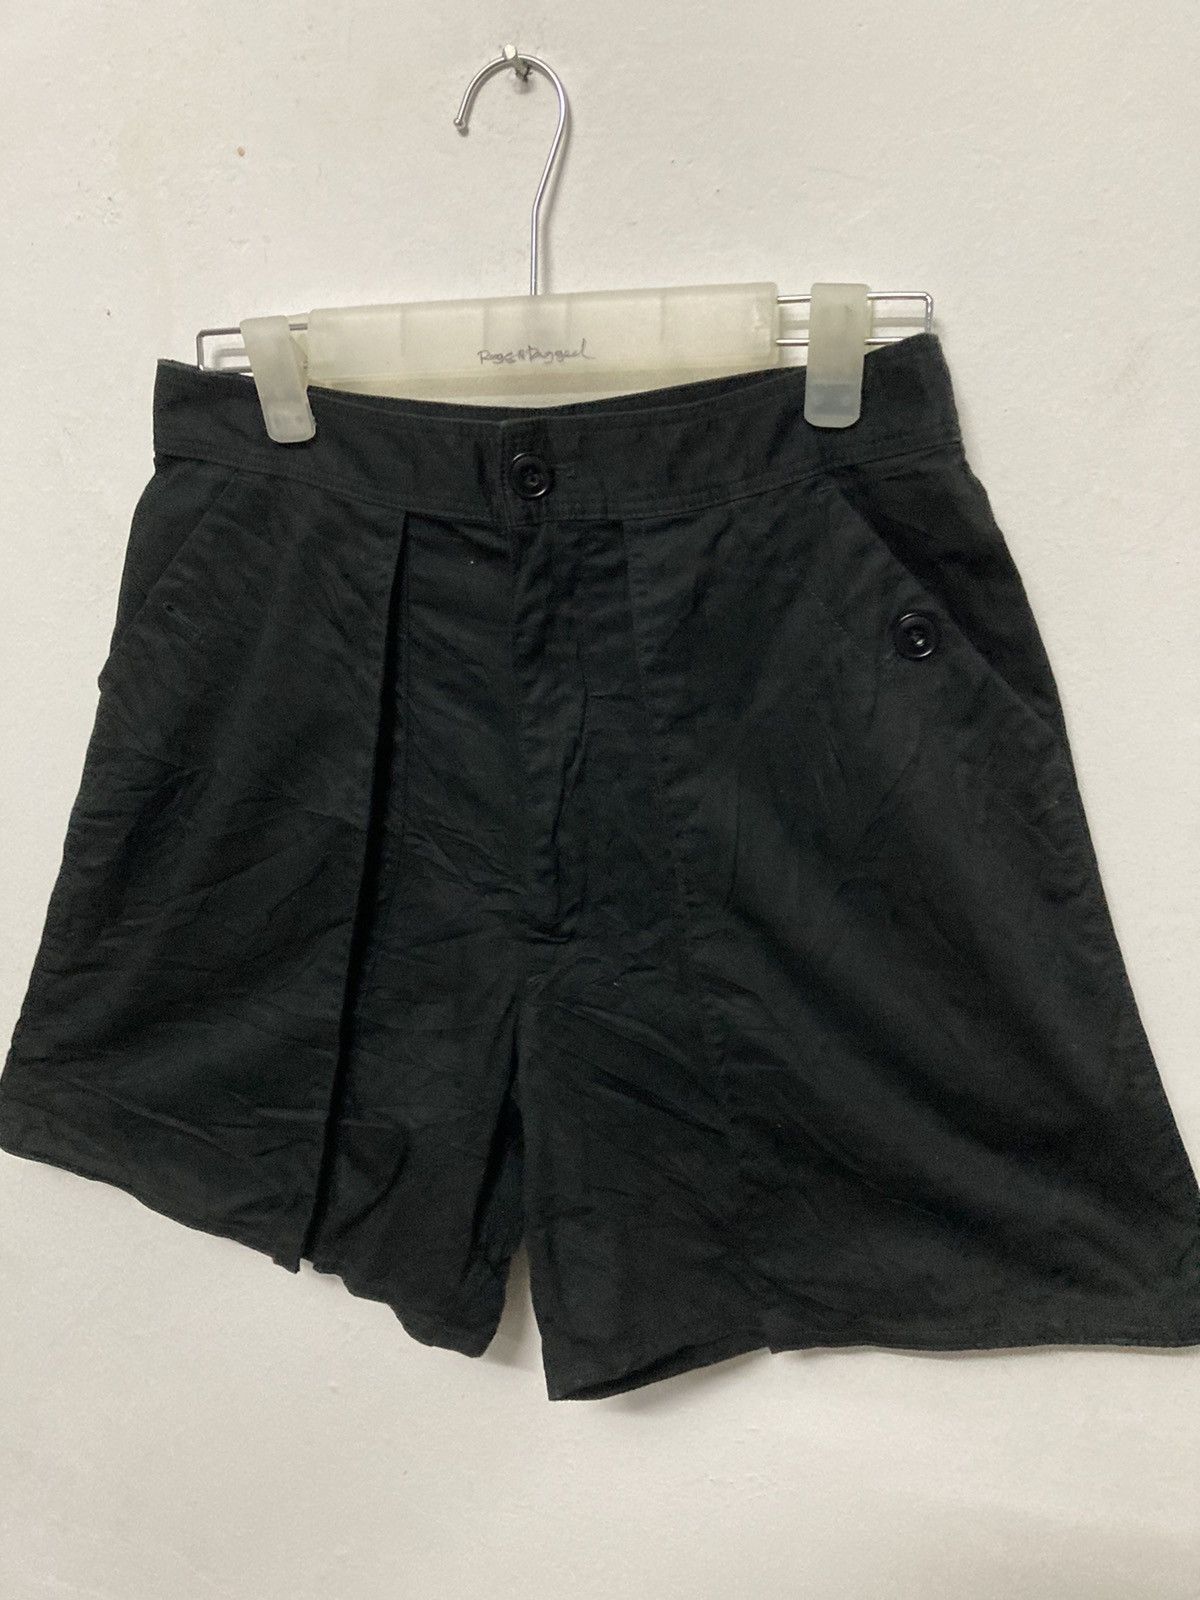 Uniqlo and Lemaire Short Pants - 3